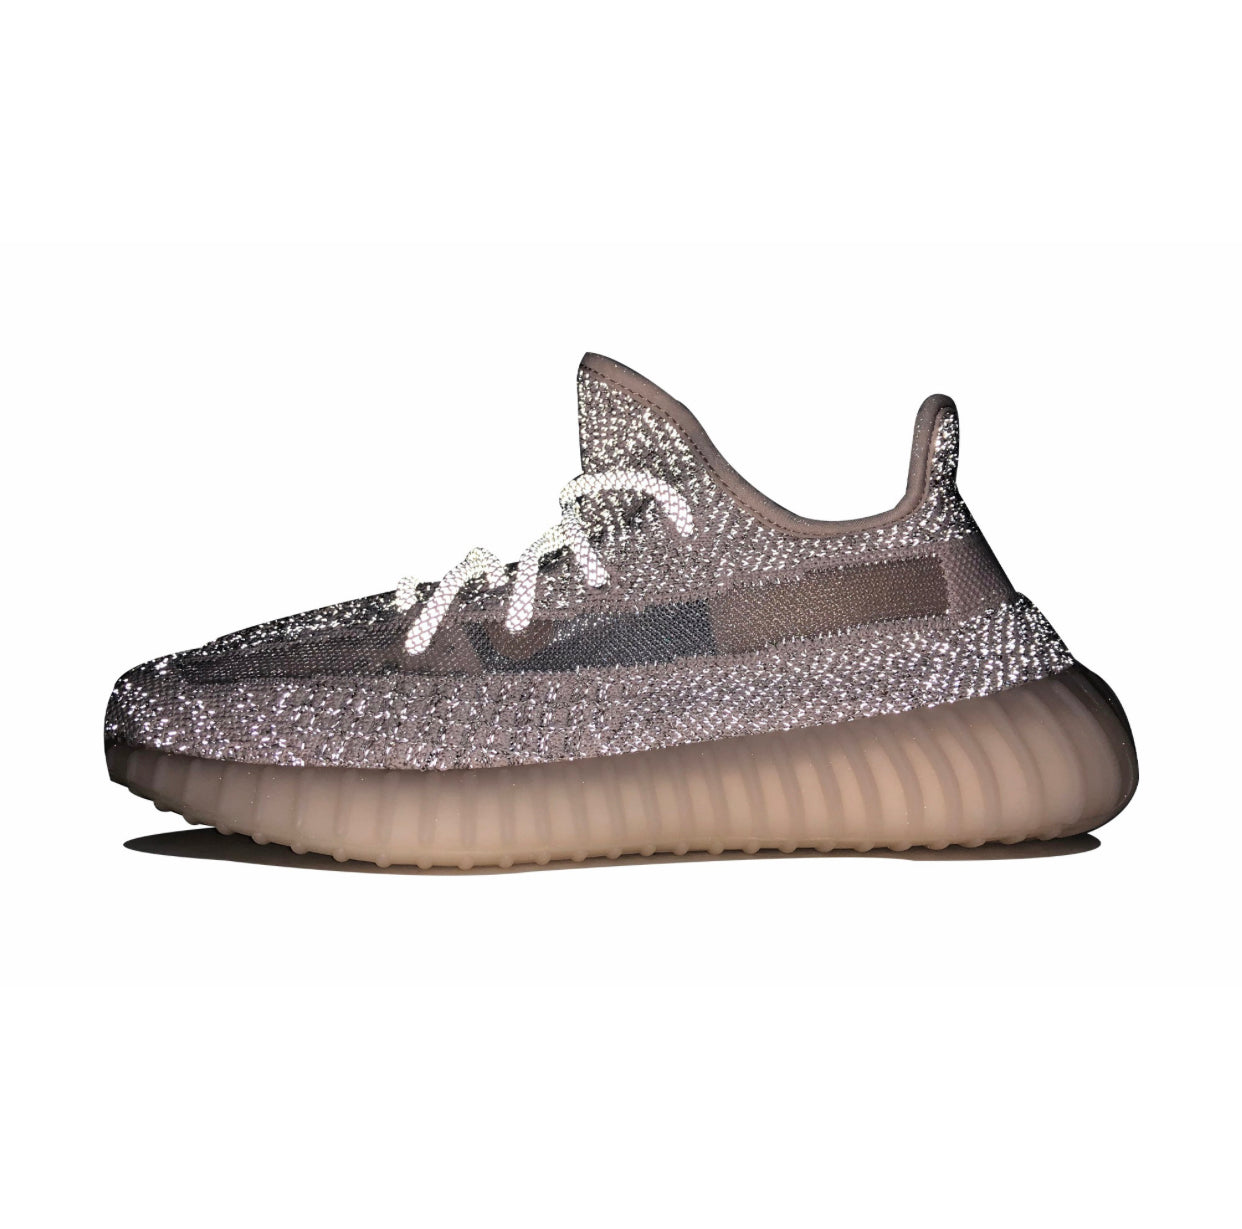 Yeezy 350 Boost V2 Synth Reflective